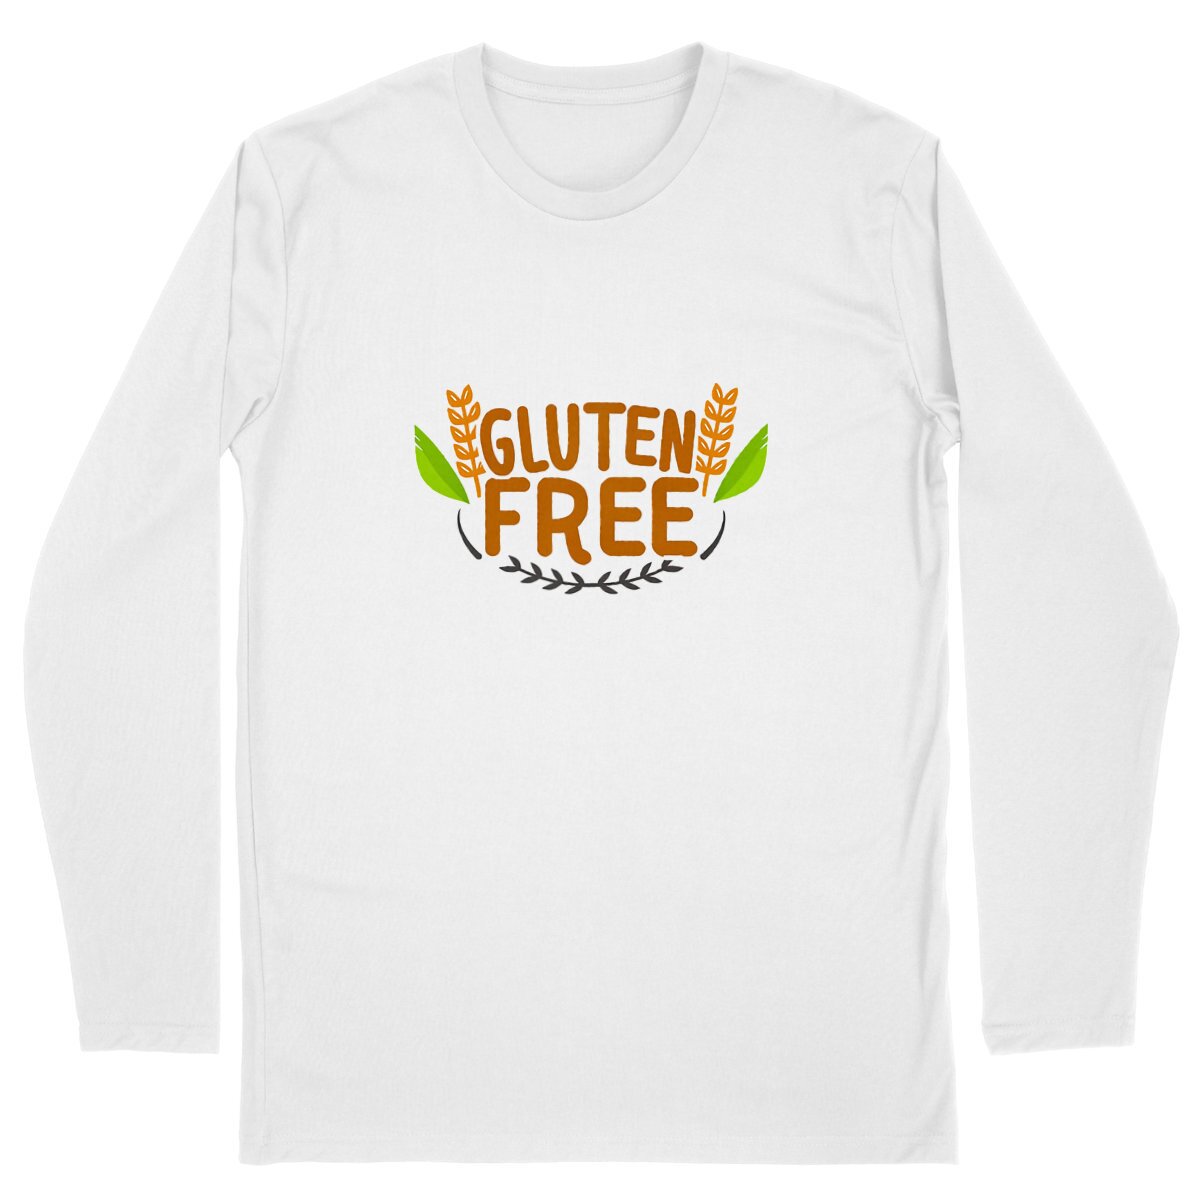 Gluten Free Long Sleeves Organic Cotton Graphic Mens Shirt | Hypoallergenic - Allergy Friendly - Naturally Free